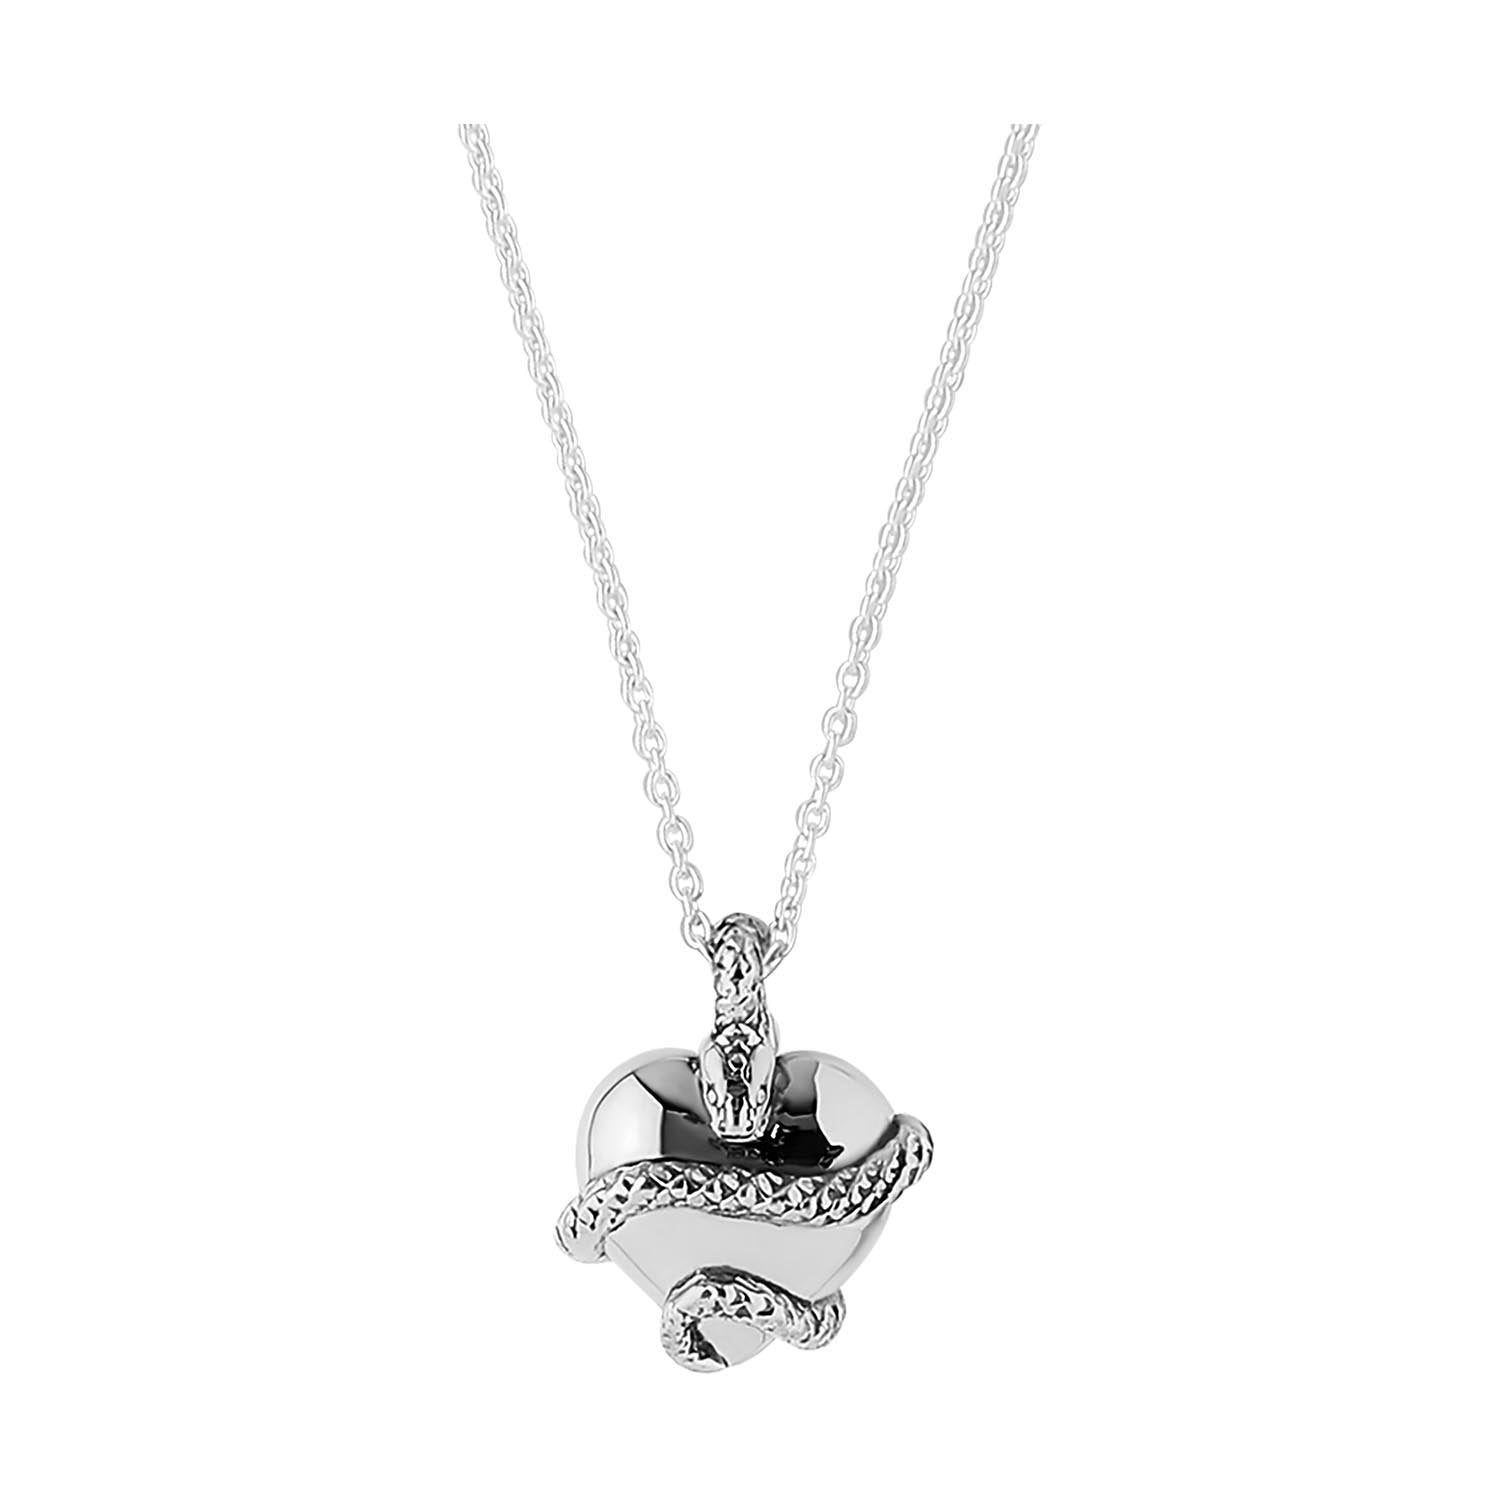 Women’s Silver Wise Heart Charm Necklace Astor & Orion